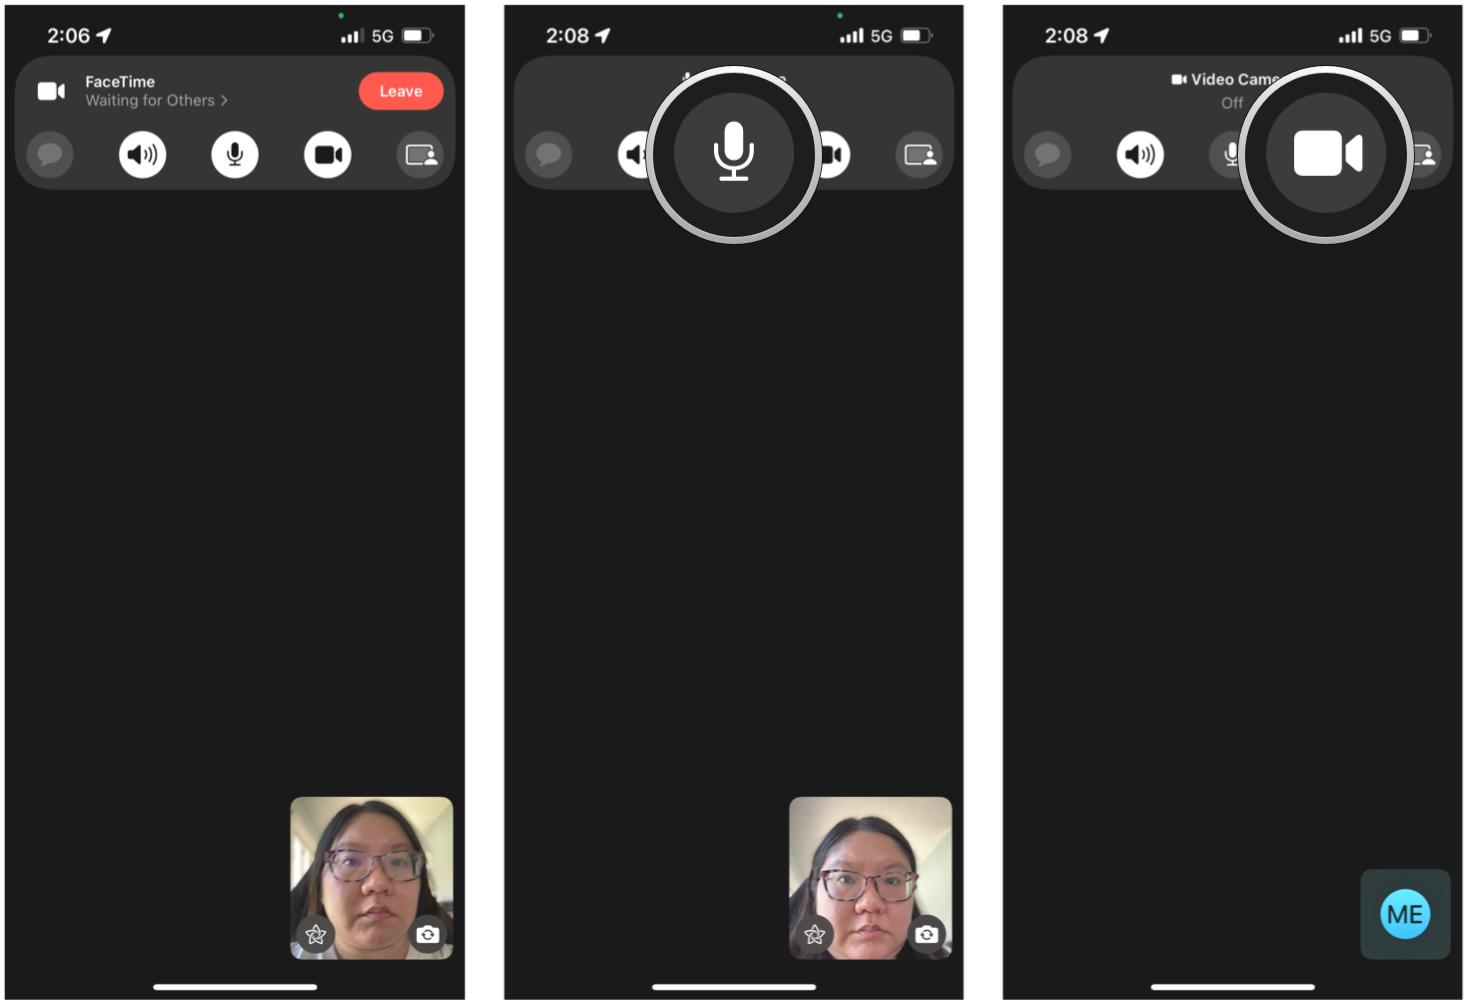 Turn off video or mute yourself on FaceTime call in iOS 15: Start or answer a FaceTime call, then tap the Microphone or Camera toggle on the floating toolbar